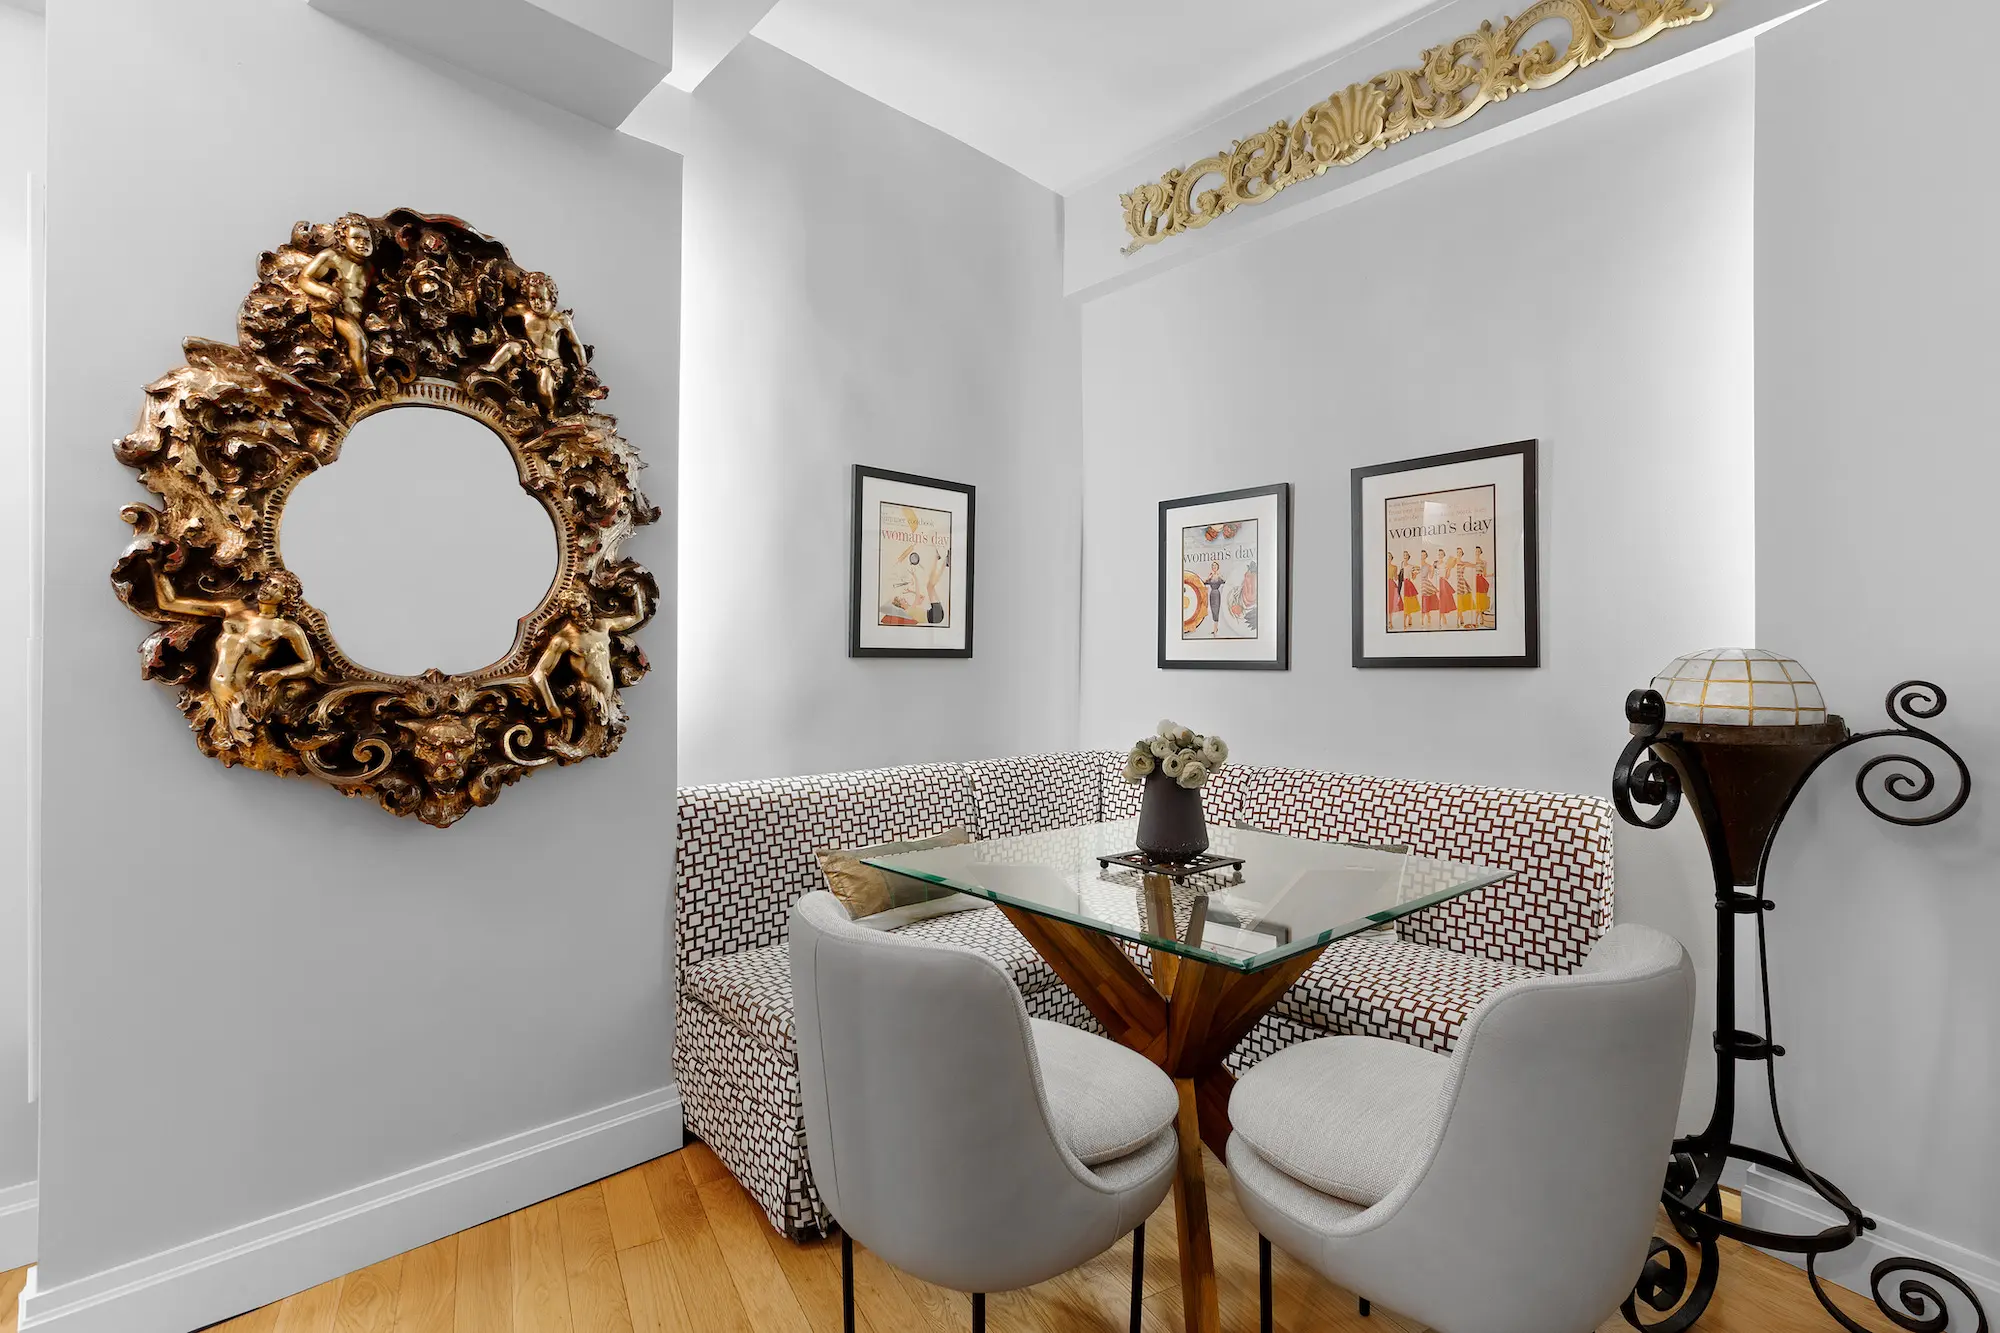 $1.3M Murray Hill co-op has two sunrooms and an outdoor hideaway | 6sqft